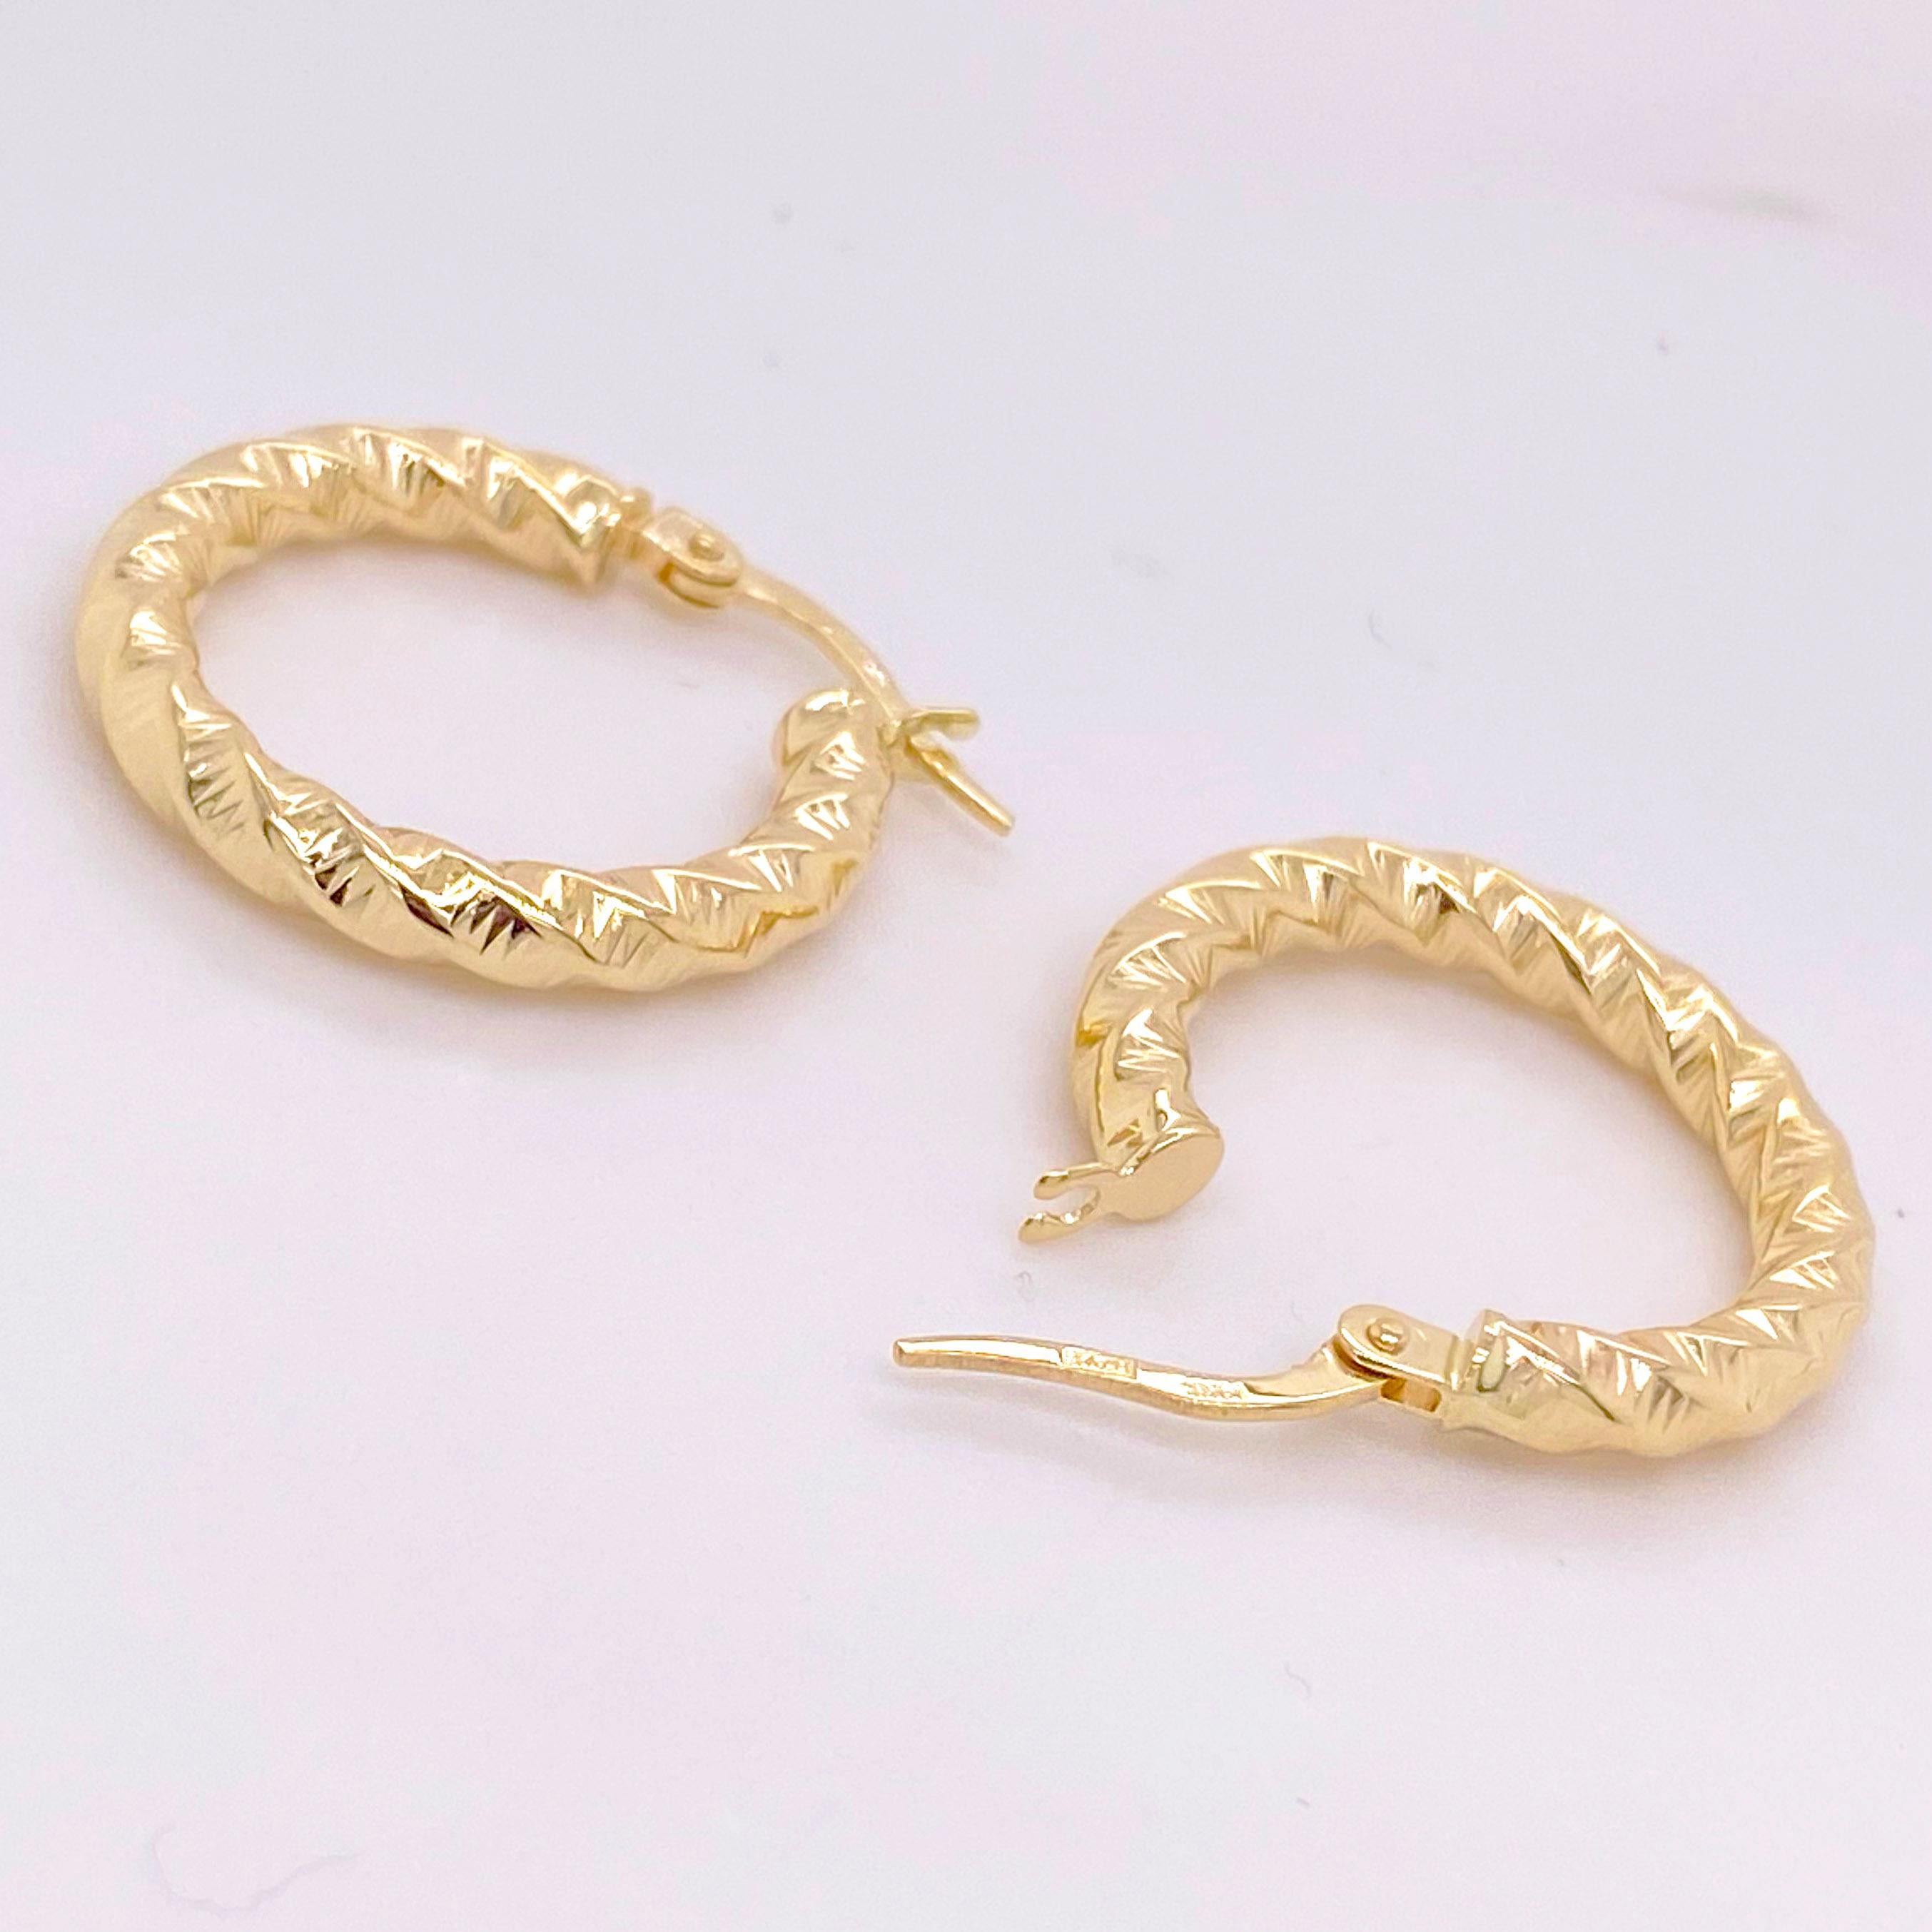 Gold hoops are a jewelry staple! These hoop earrings are the perfect addition to any fine jewelry collection. With a classic design and unique twist texture and high polish finish, these hoops are so versatile! Wear them everyday, casually or save